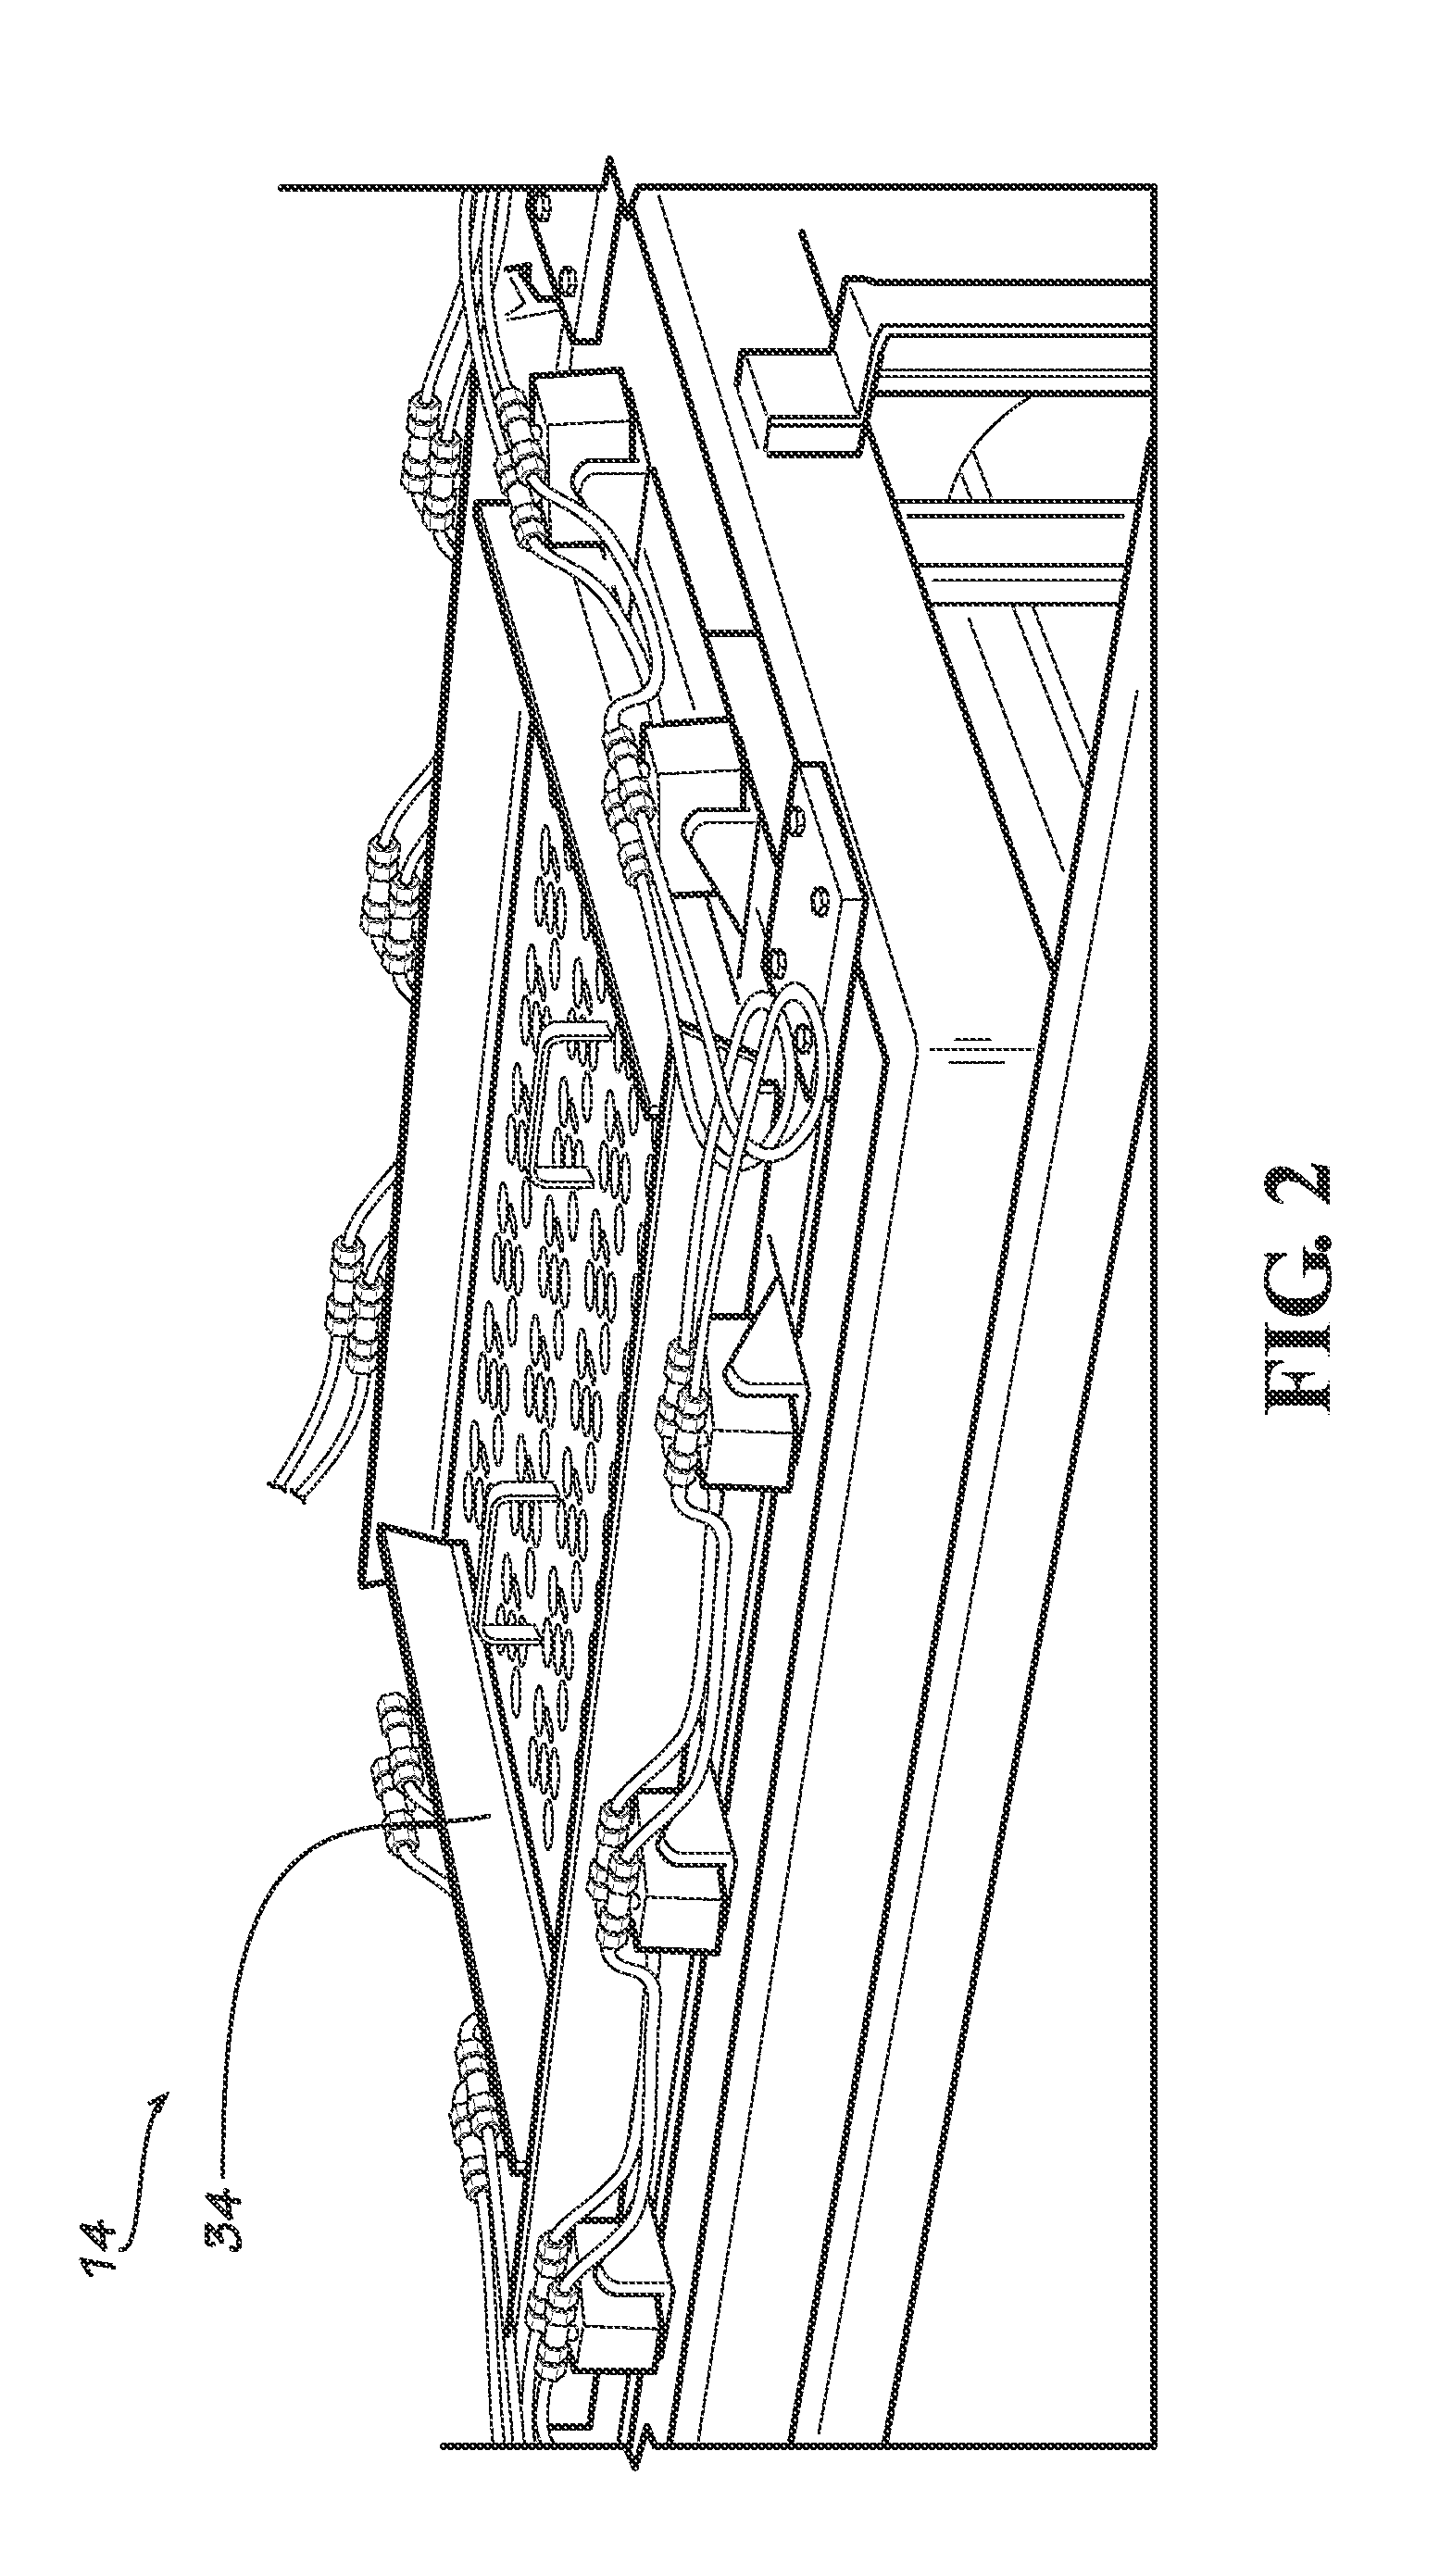 Apparatus and methods for selective thermoforming